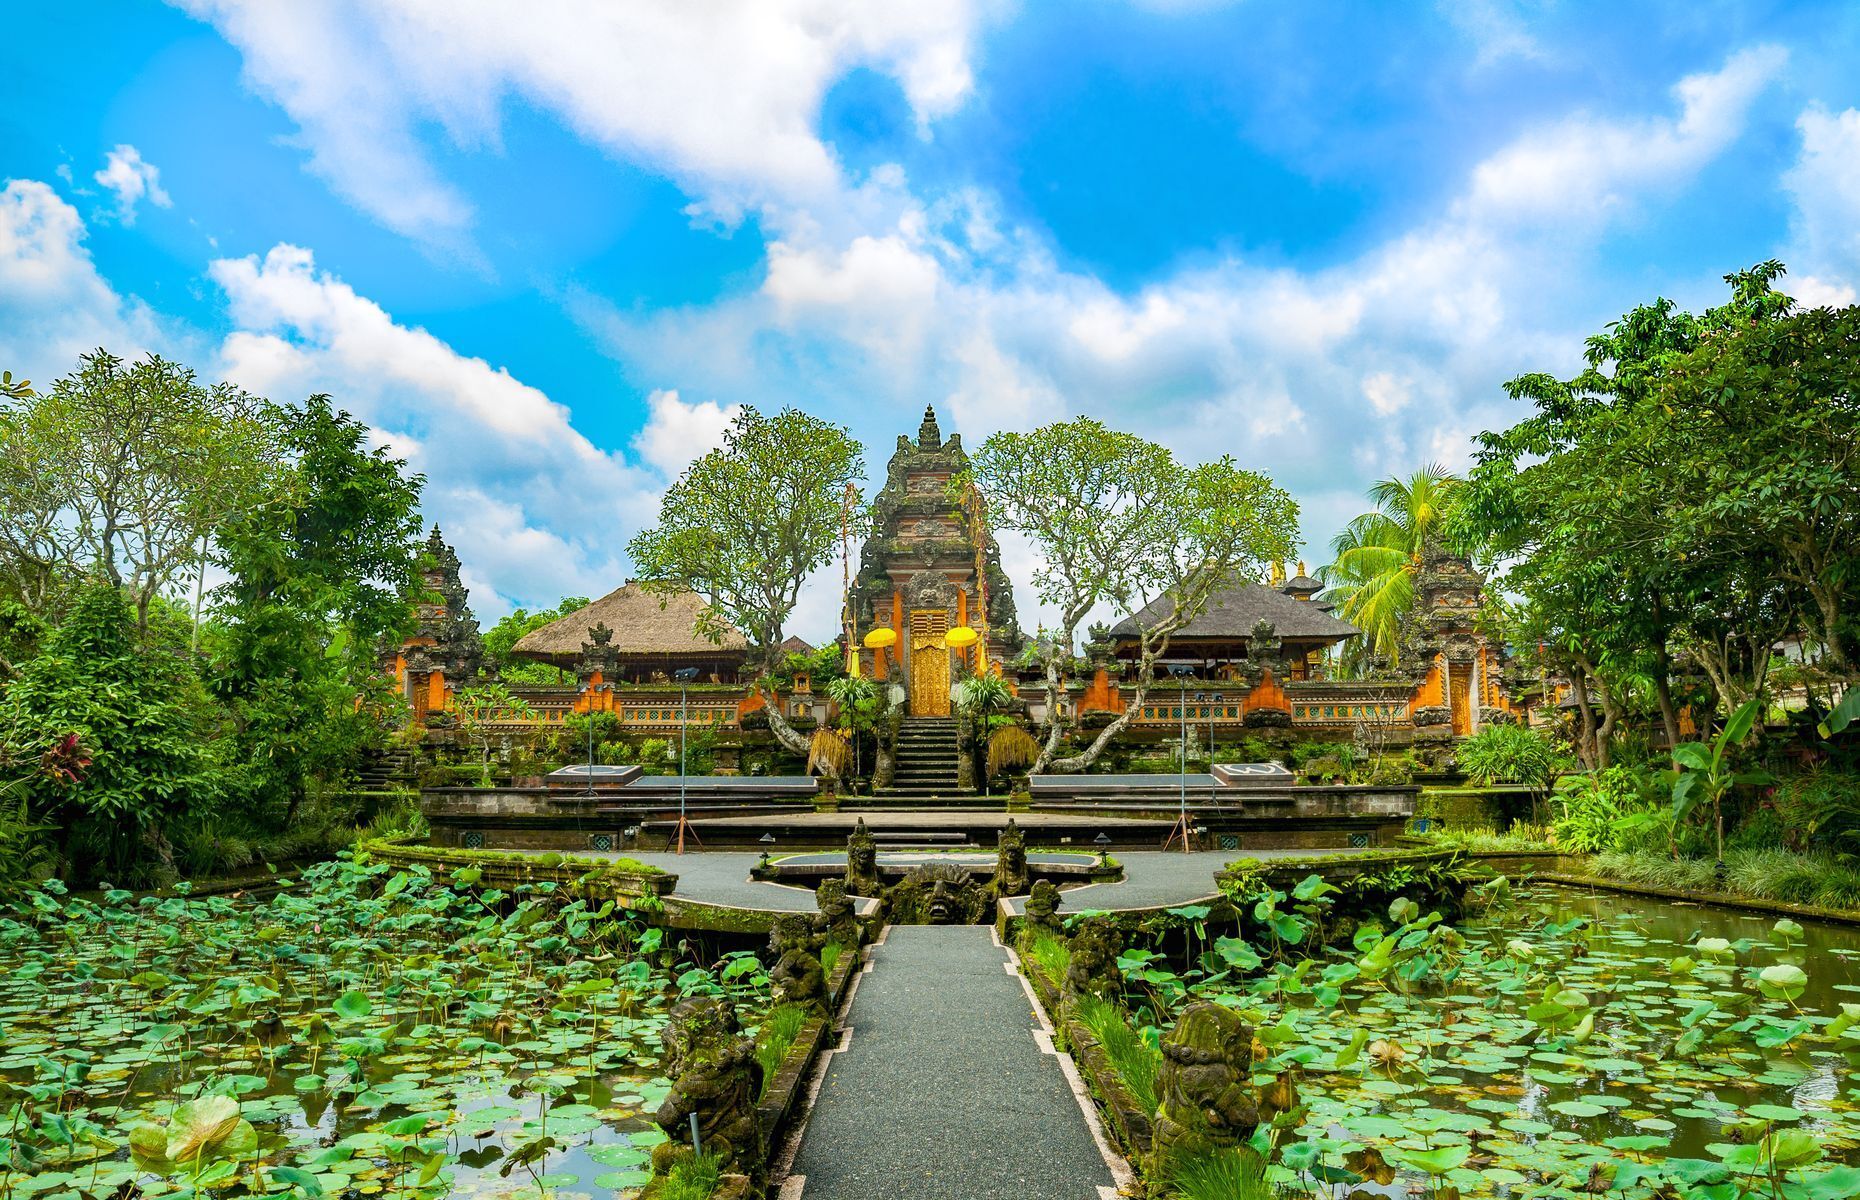 Nestled in the heart of the Indonesian island of Bali, <a href="https://theworldtravelguy.com/best-things-to-do-in-ubud-bali-monkeys-temples-markets/" rel="noreferrer noopener">Ubud</a> is a cultural and natural haven of peace. From the lush rice terraces of Tegallalang and legendary Saraswati temple to the <a href="https://monkeyforestubud.com/" rel="noreferrer noopener">Monkey Forest</a> in the heart of the city, there’s no shortage of interesting things to do. Art enthusiasts will be especially delighted as Ubud’s renowned galleries, craft studios, and market offer superb local creations. This tranquil town is also ideal for yoga retreats and Balinese cooking classes.